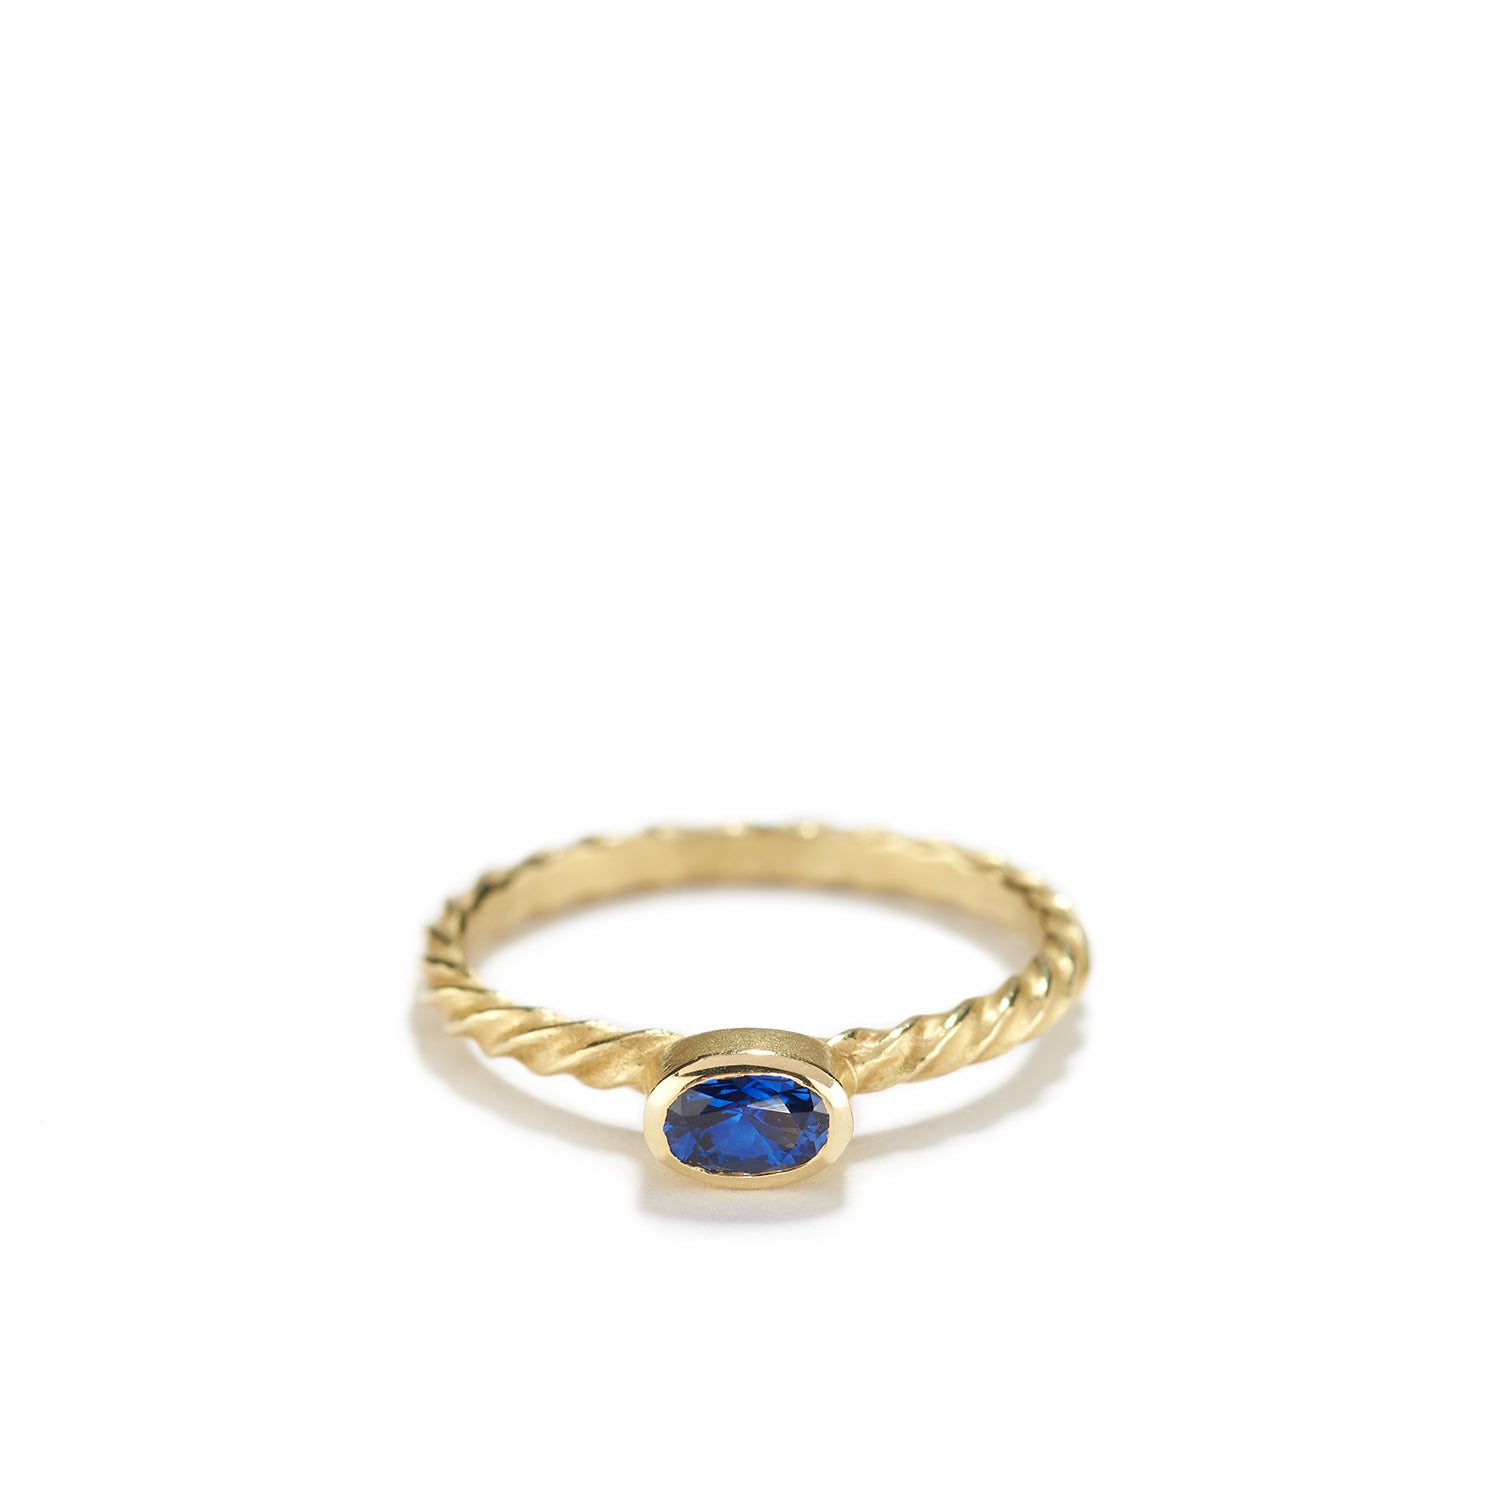 Blue Sapphire Ring with Spiral Band